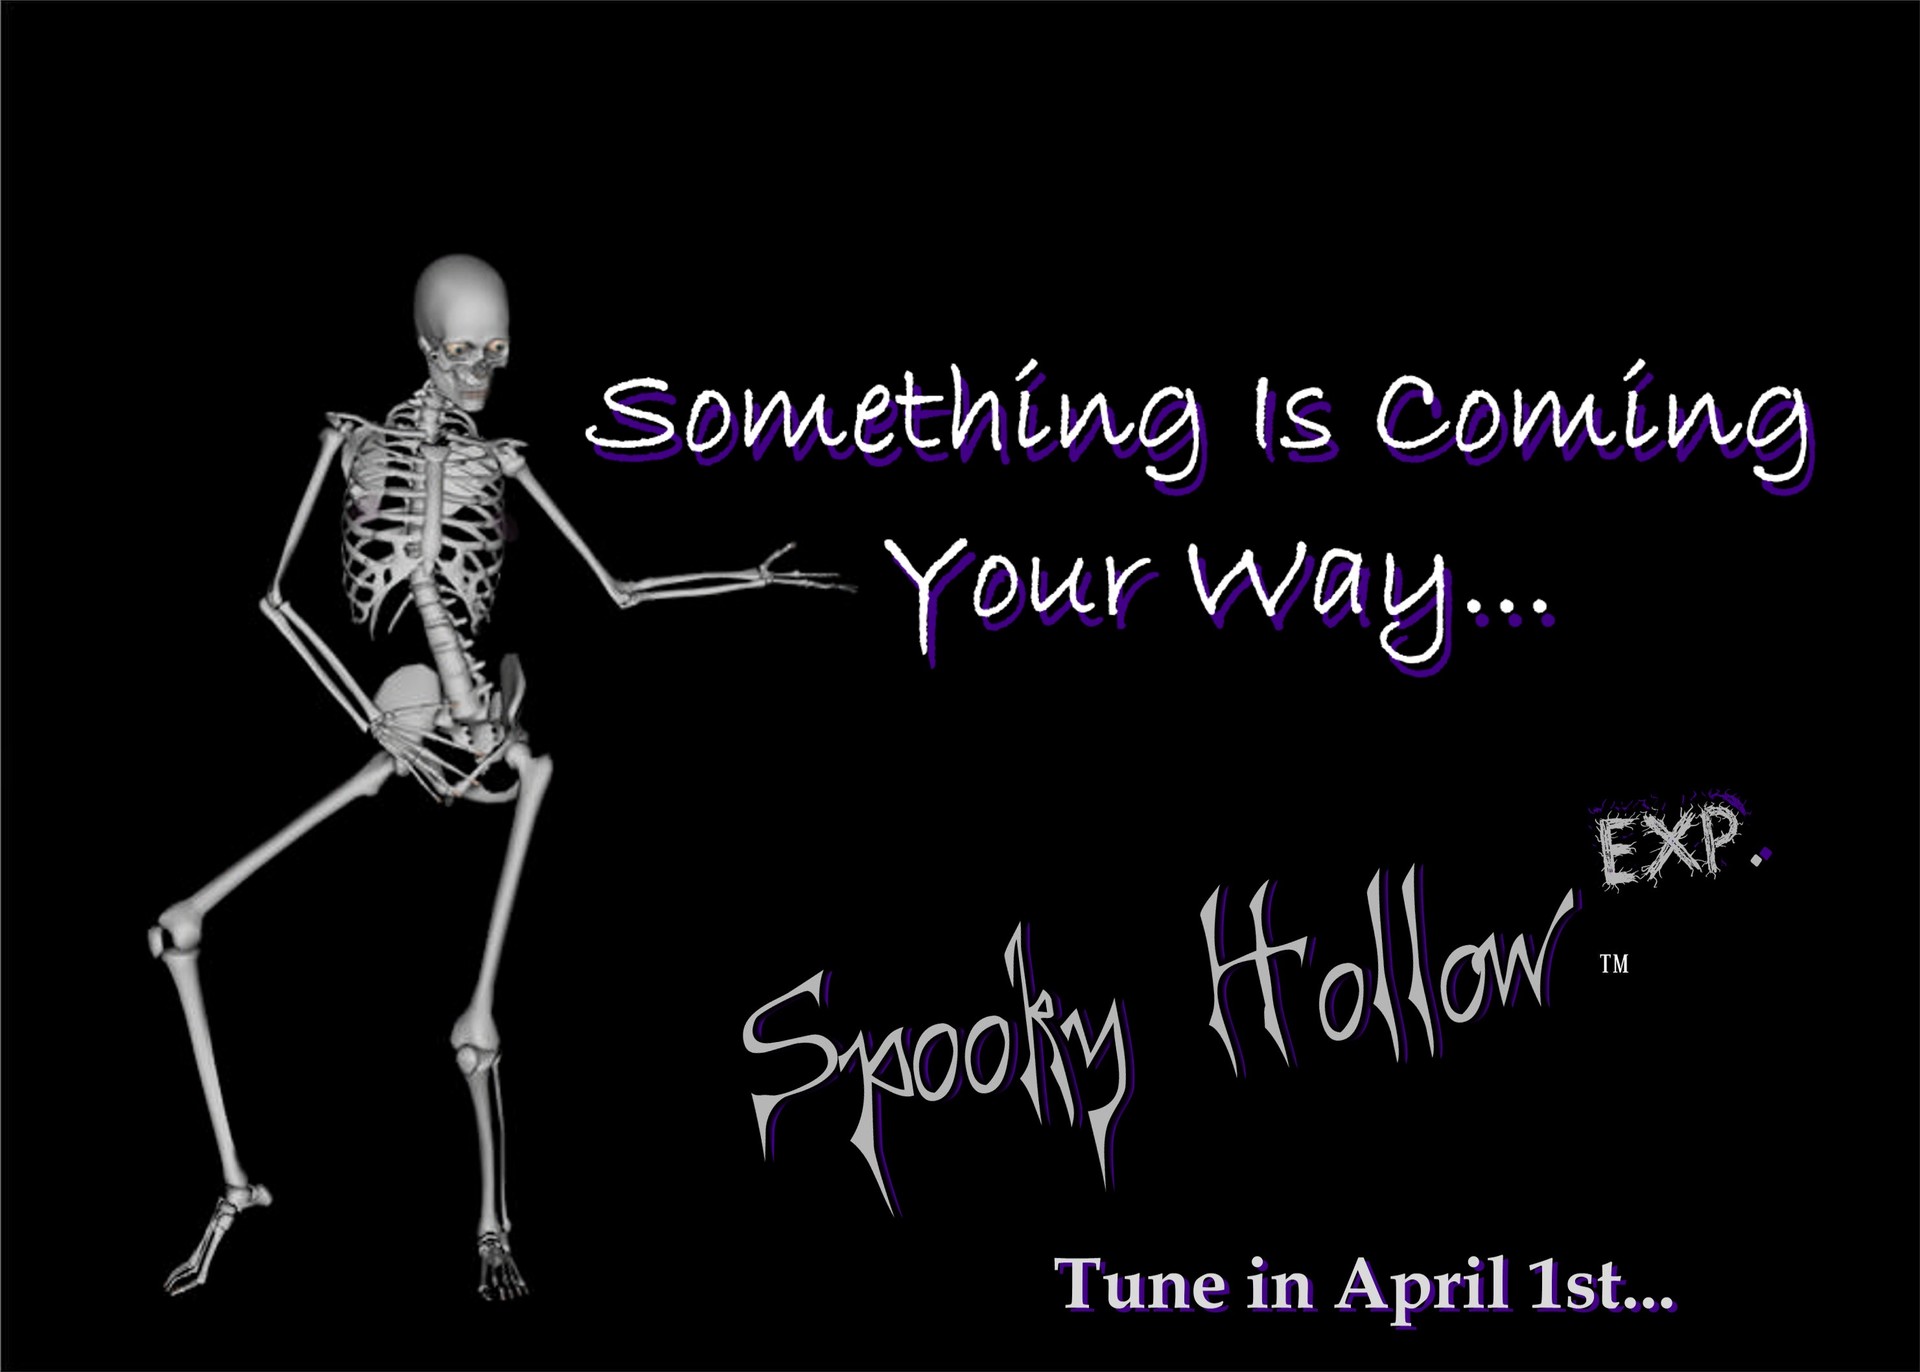 Spooky Hollow Experience announcement